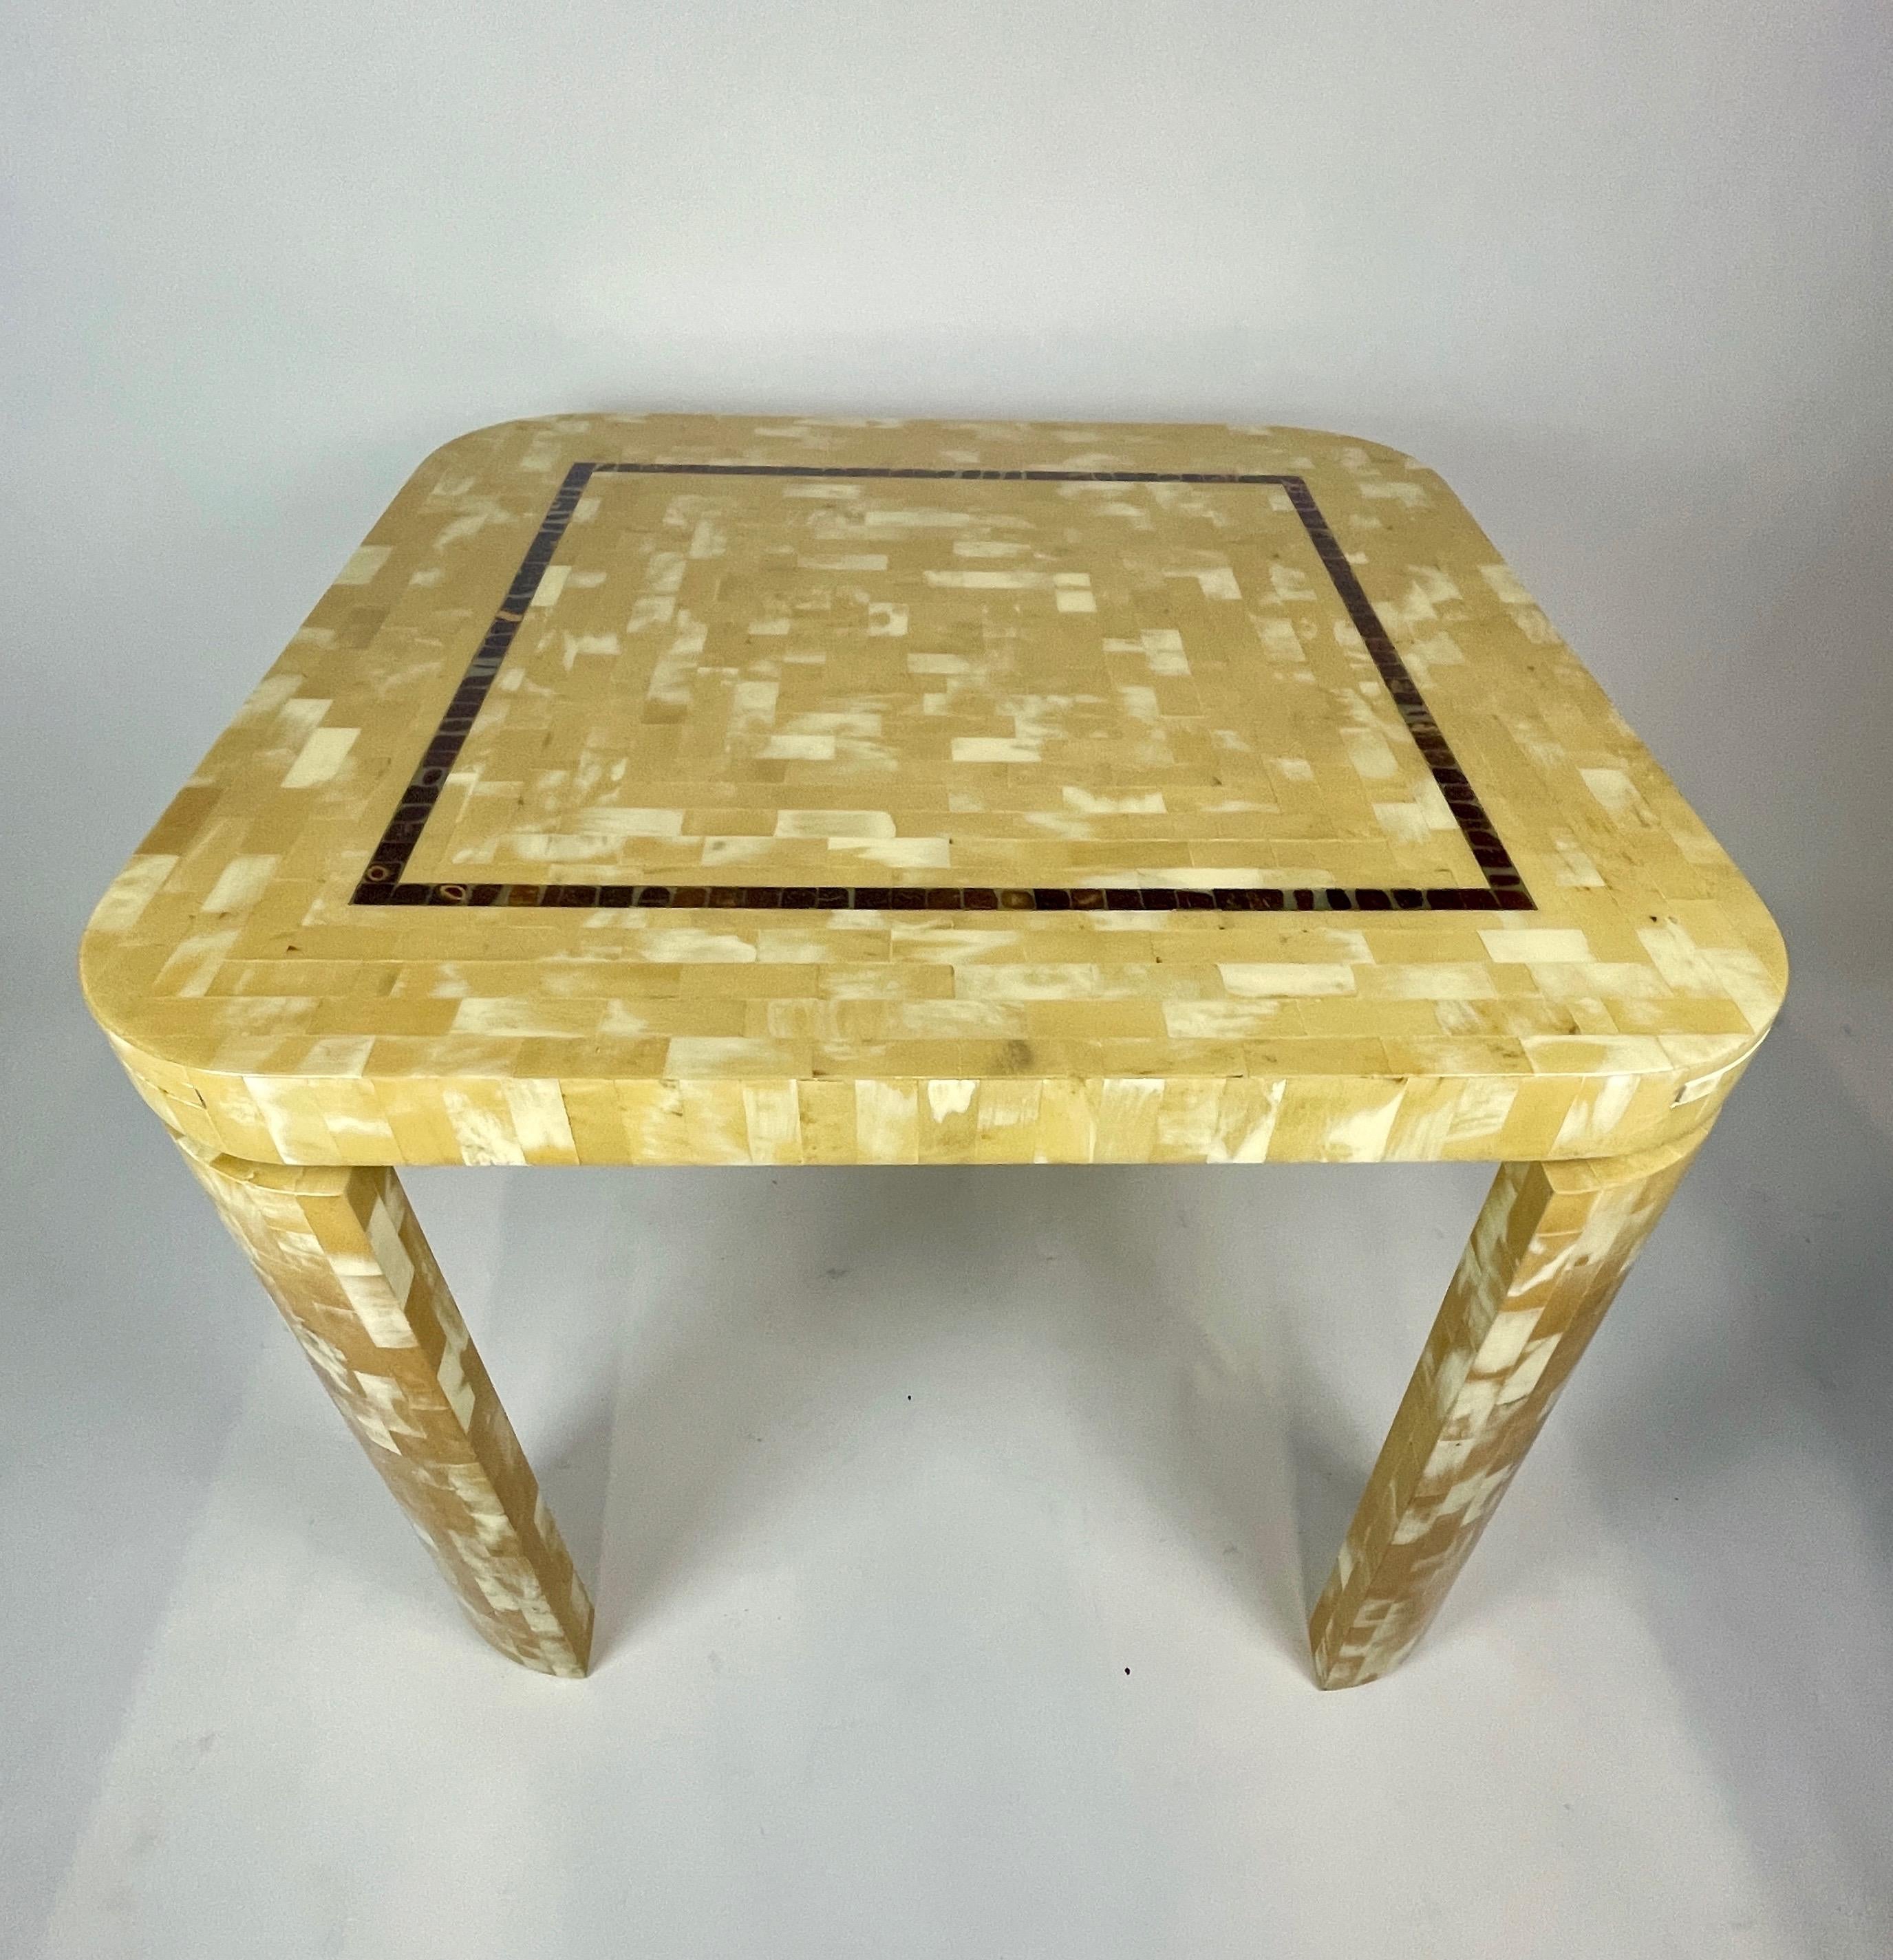 Tesselated Bone Square Game Table by Enrique Garcel Patchwork, Bogota, Columbia 10